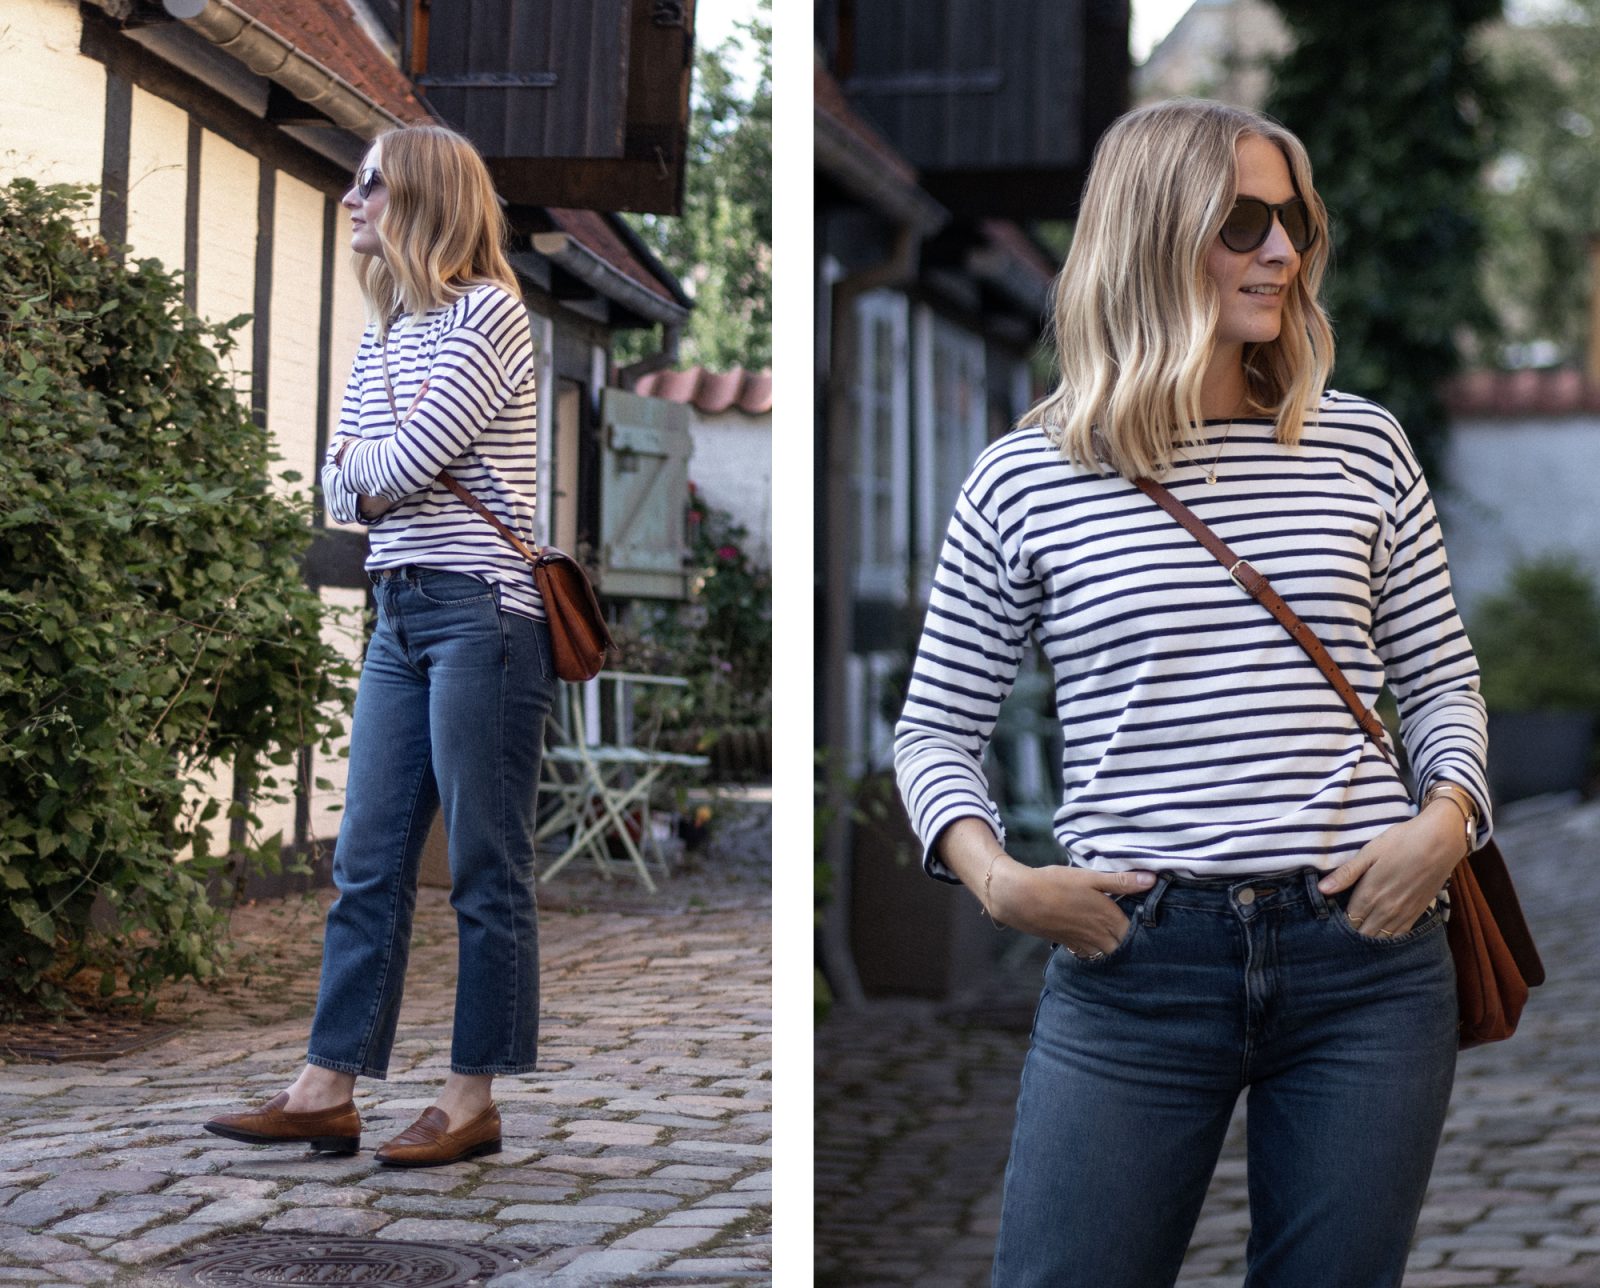 The fitting jeans I've had – less